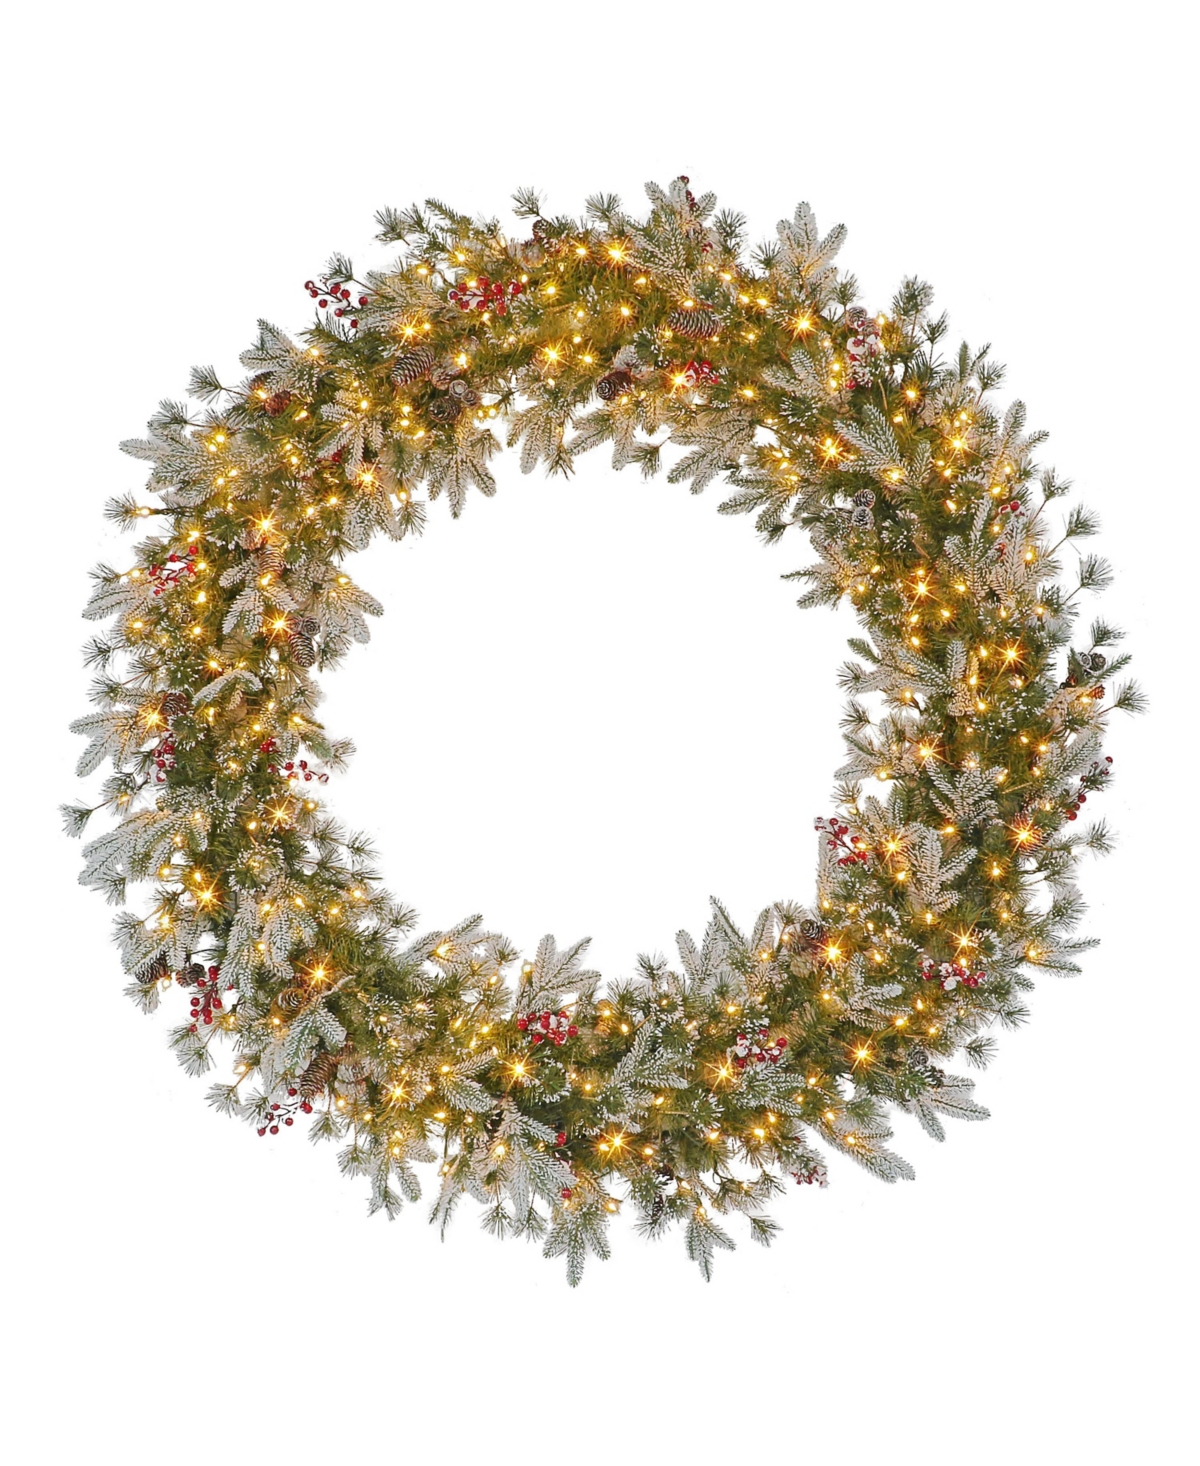 Puleo 60" Pre-lit Glittery Wreath With 300 Underwriters Laboratories Clear Incandescent Lights, 700 Tips In Green